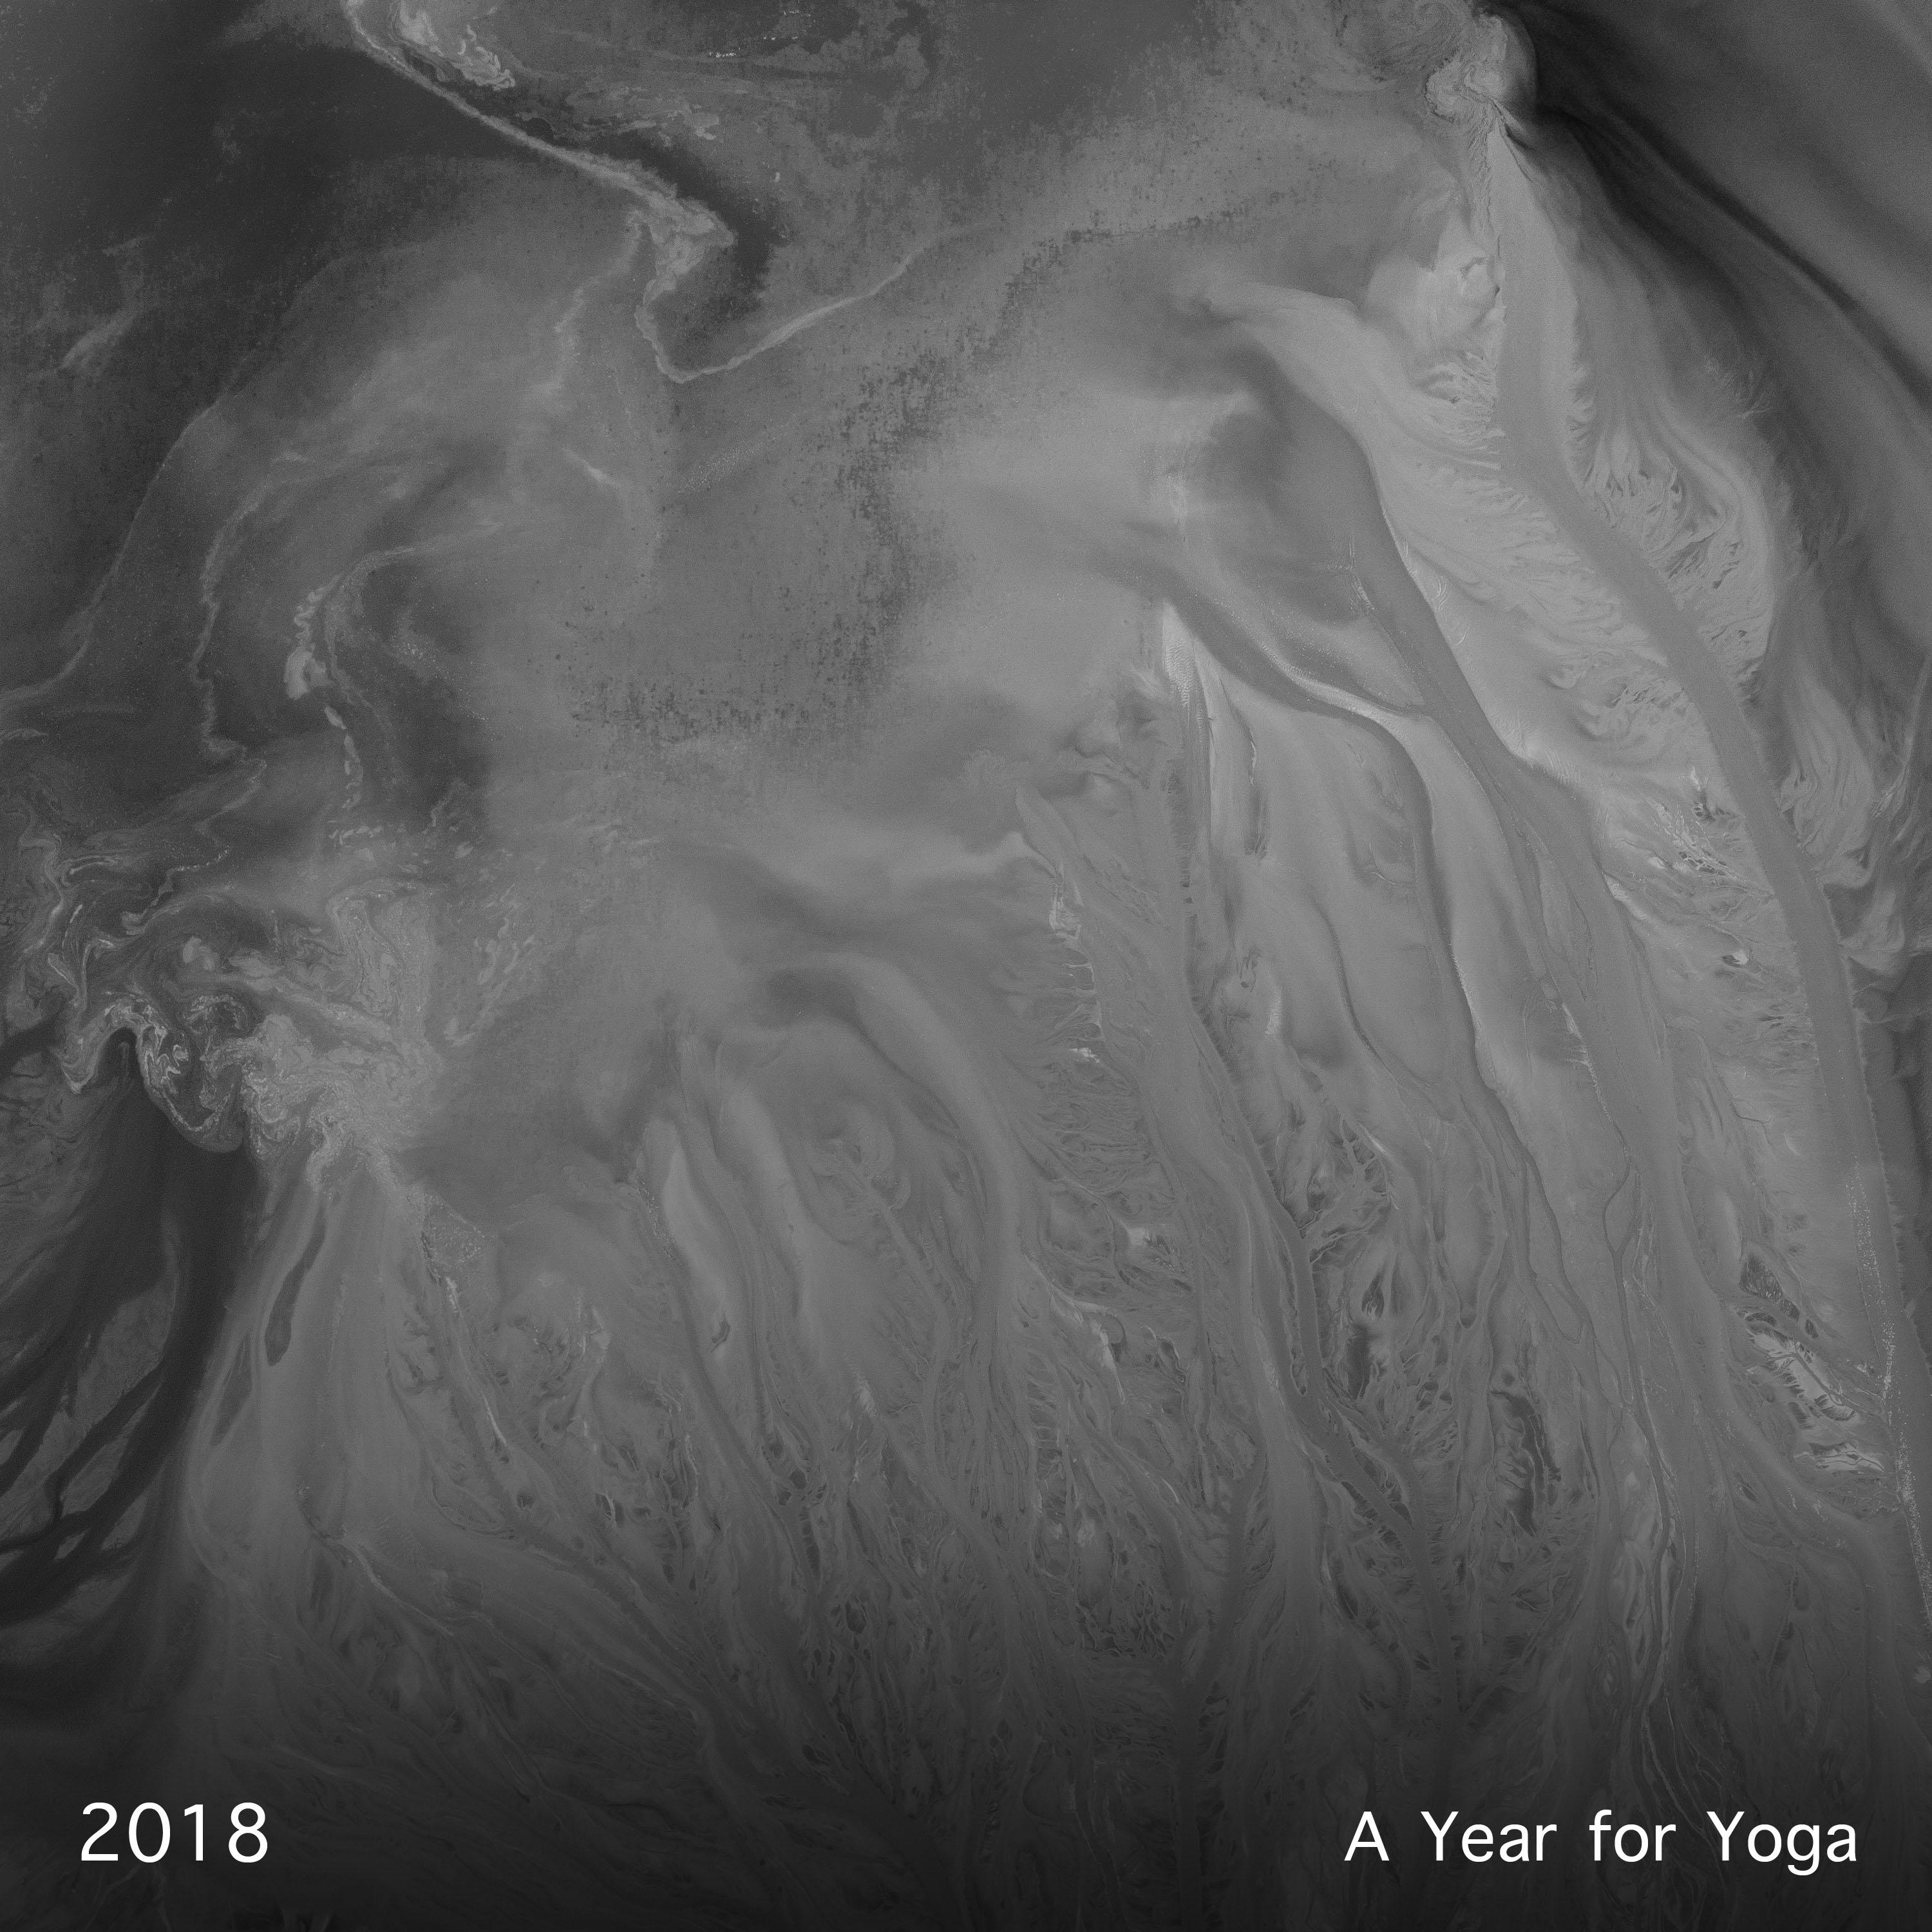 2018 - A Year for Yoga